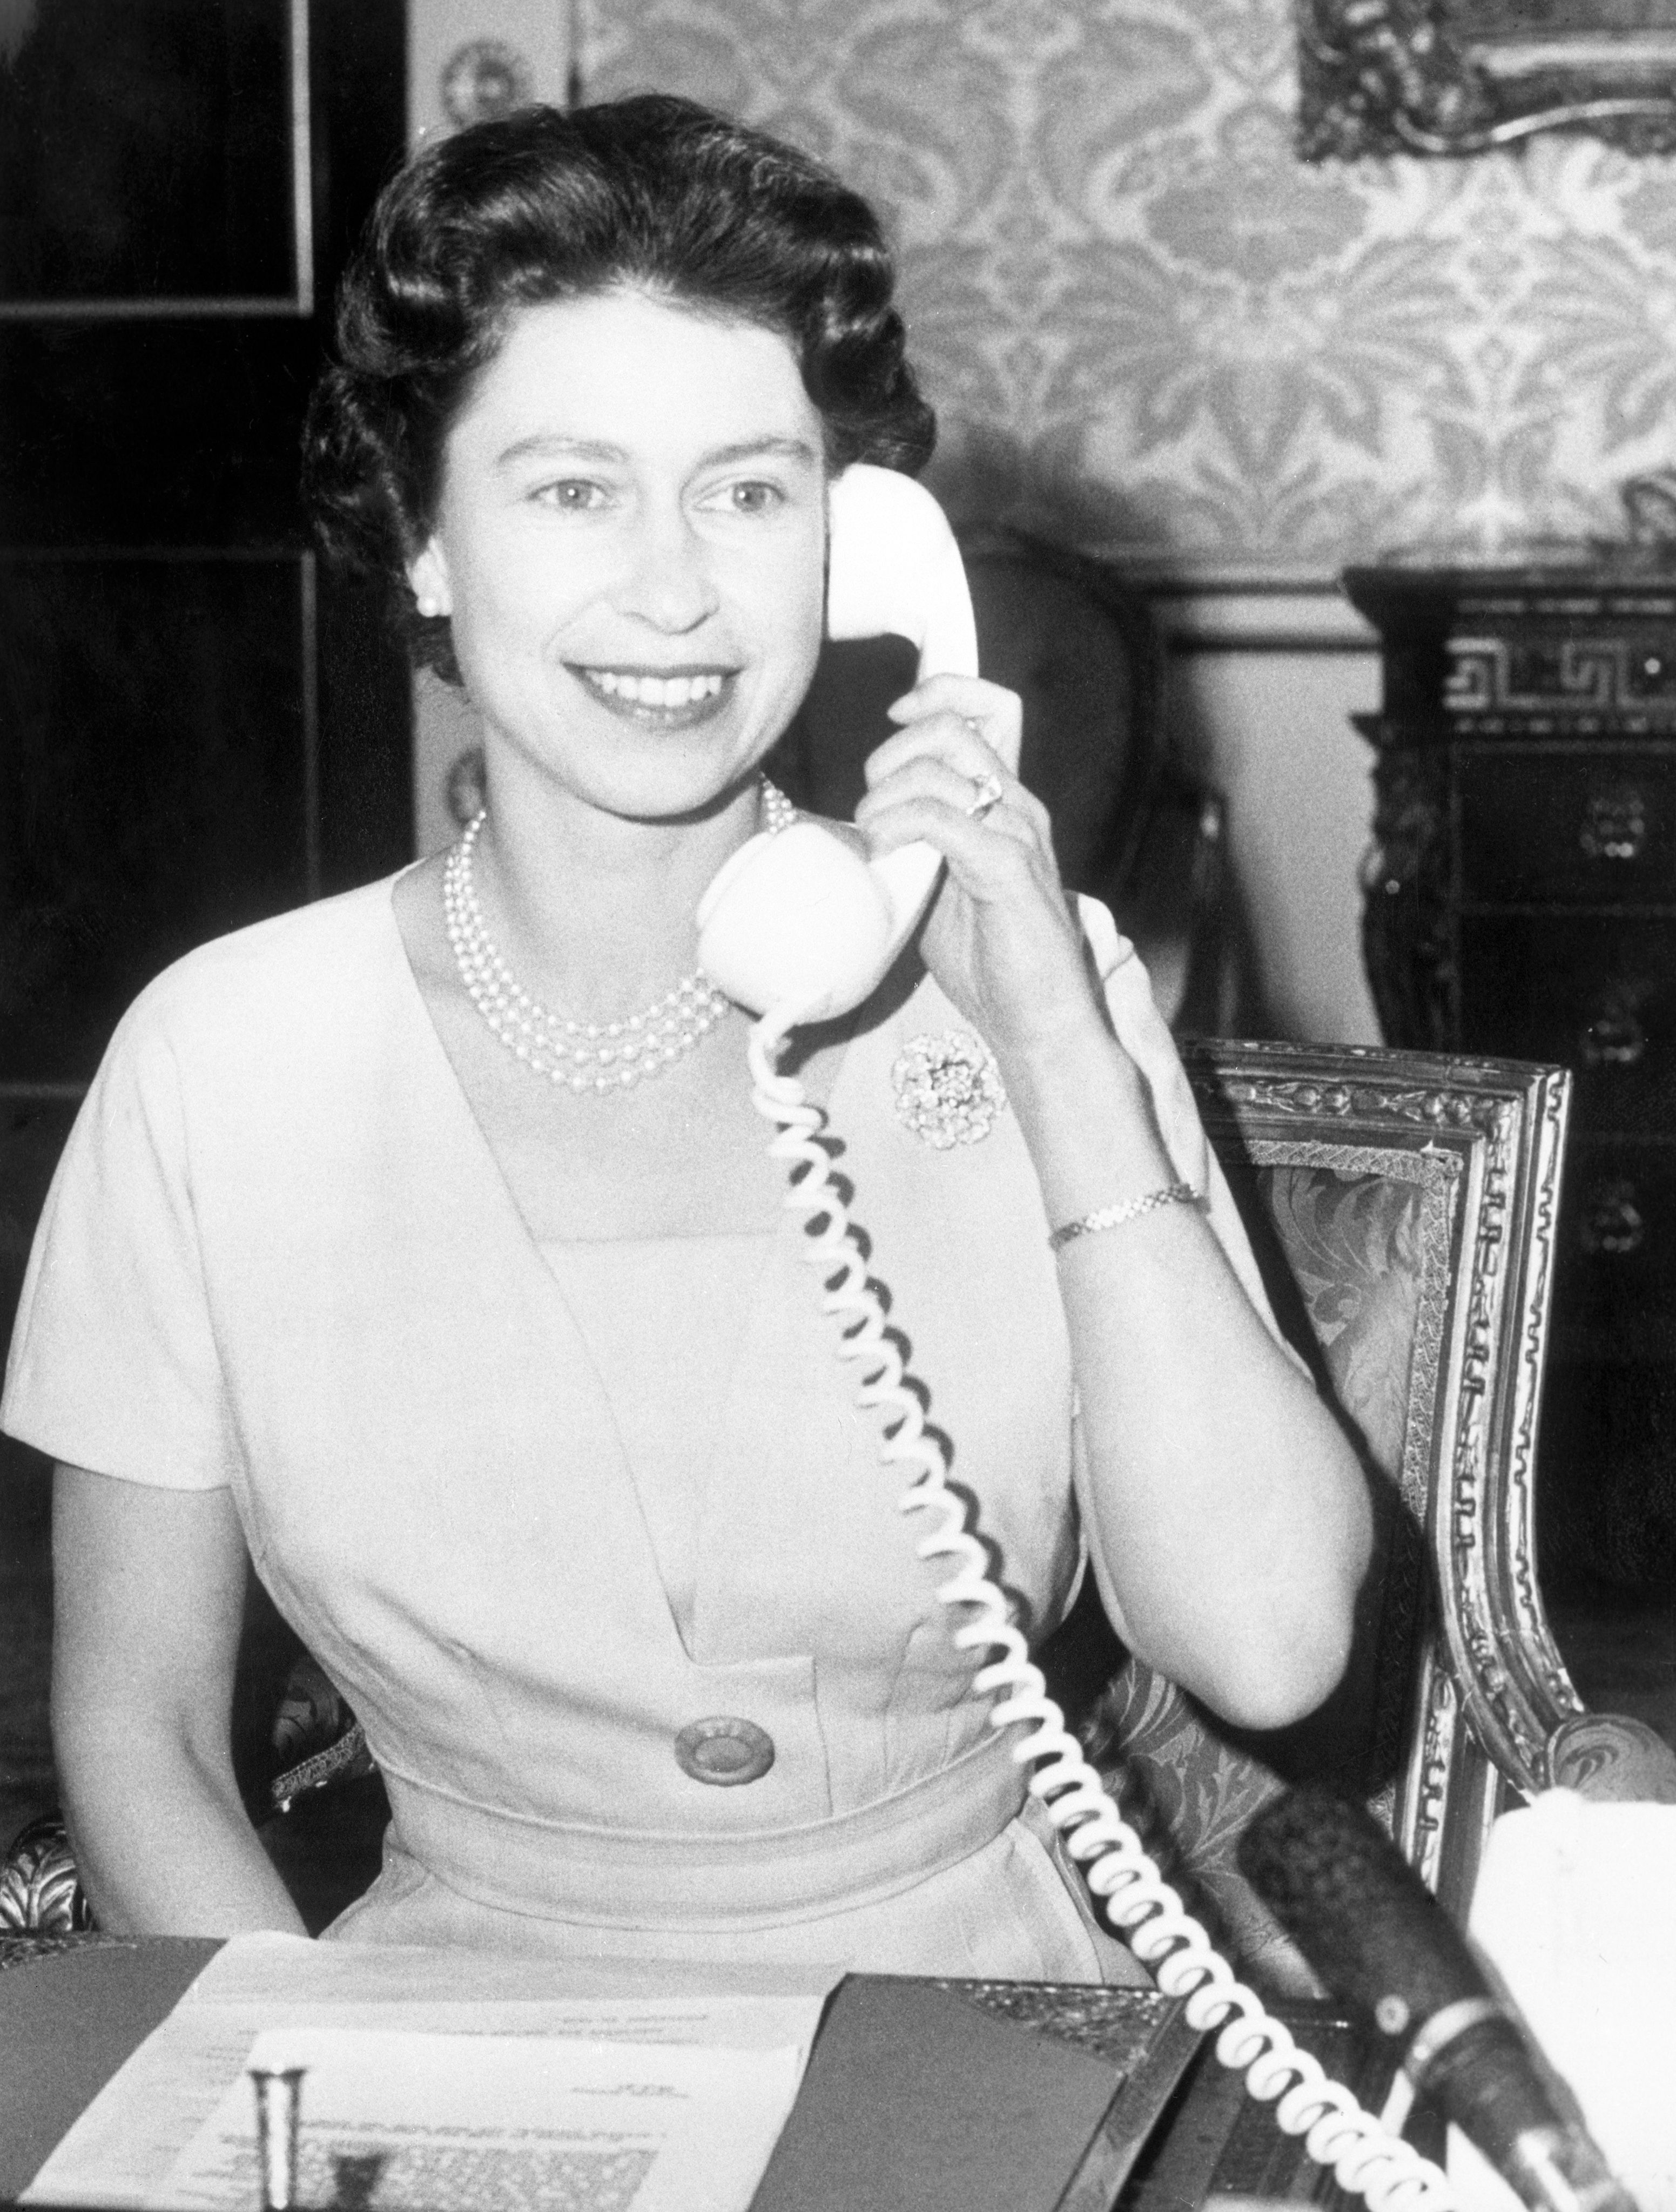 Queen Elizabeth II speaking to John Diefenbaker, Prime Minister of Canada. She was inaugurating CANTAT (Canadian Trans-Atlantic Telephone) cable by making the first call to Ottawa.